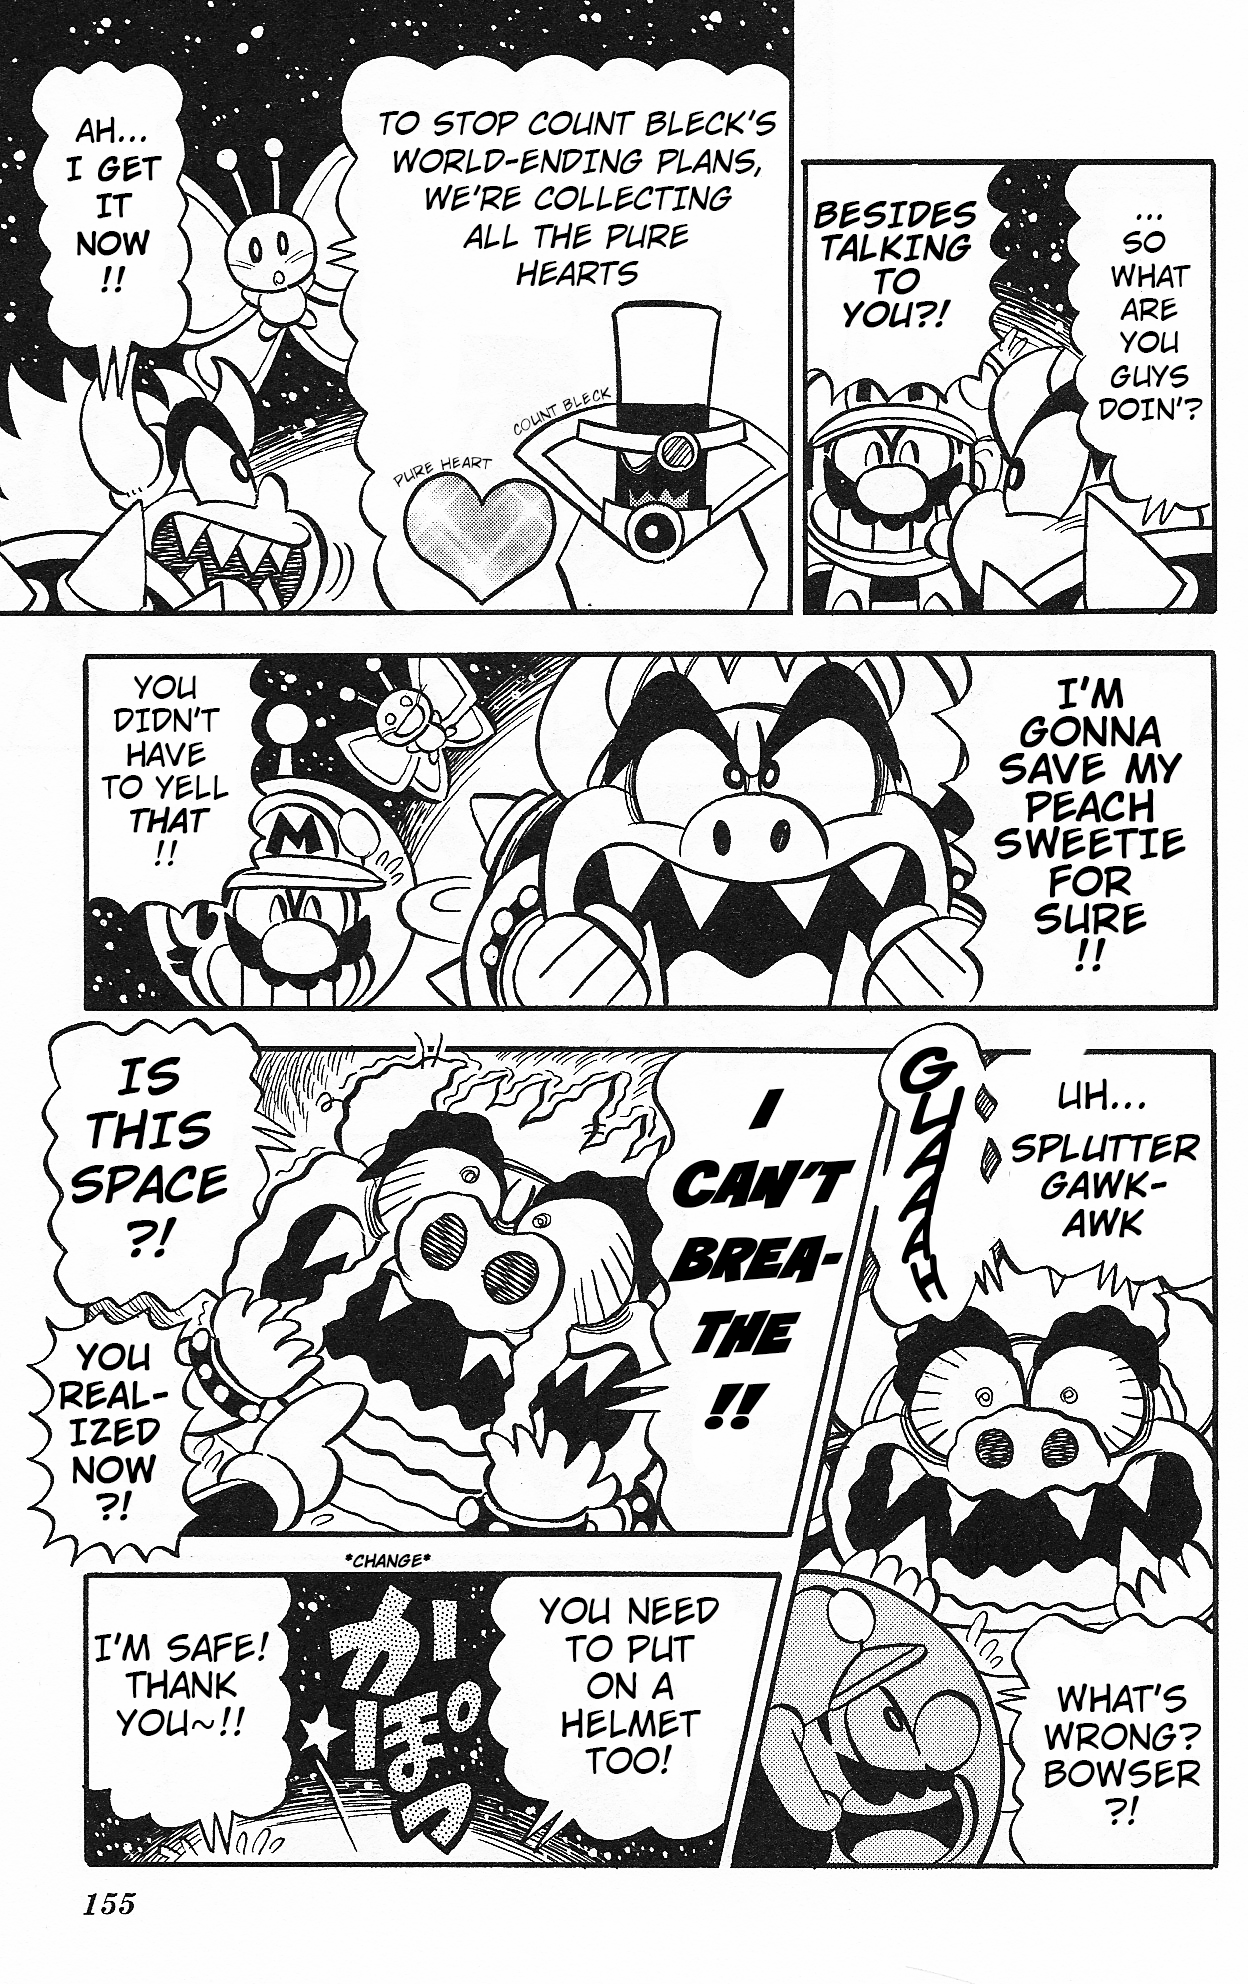 Super Mario-Kun Vol.37 Chapter 11: Hilarious Shock! Sibling Rivalry In Space?! - Picture 3